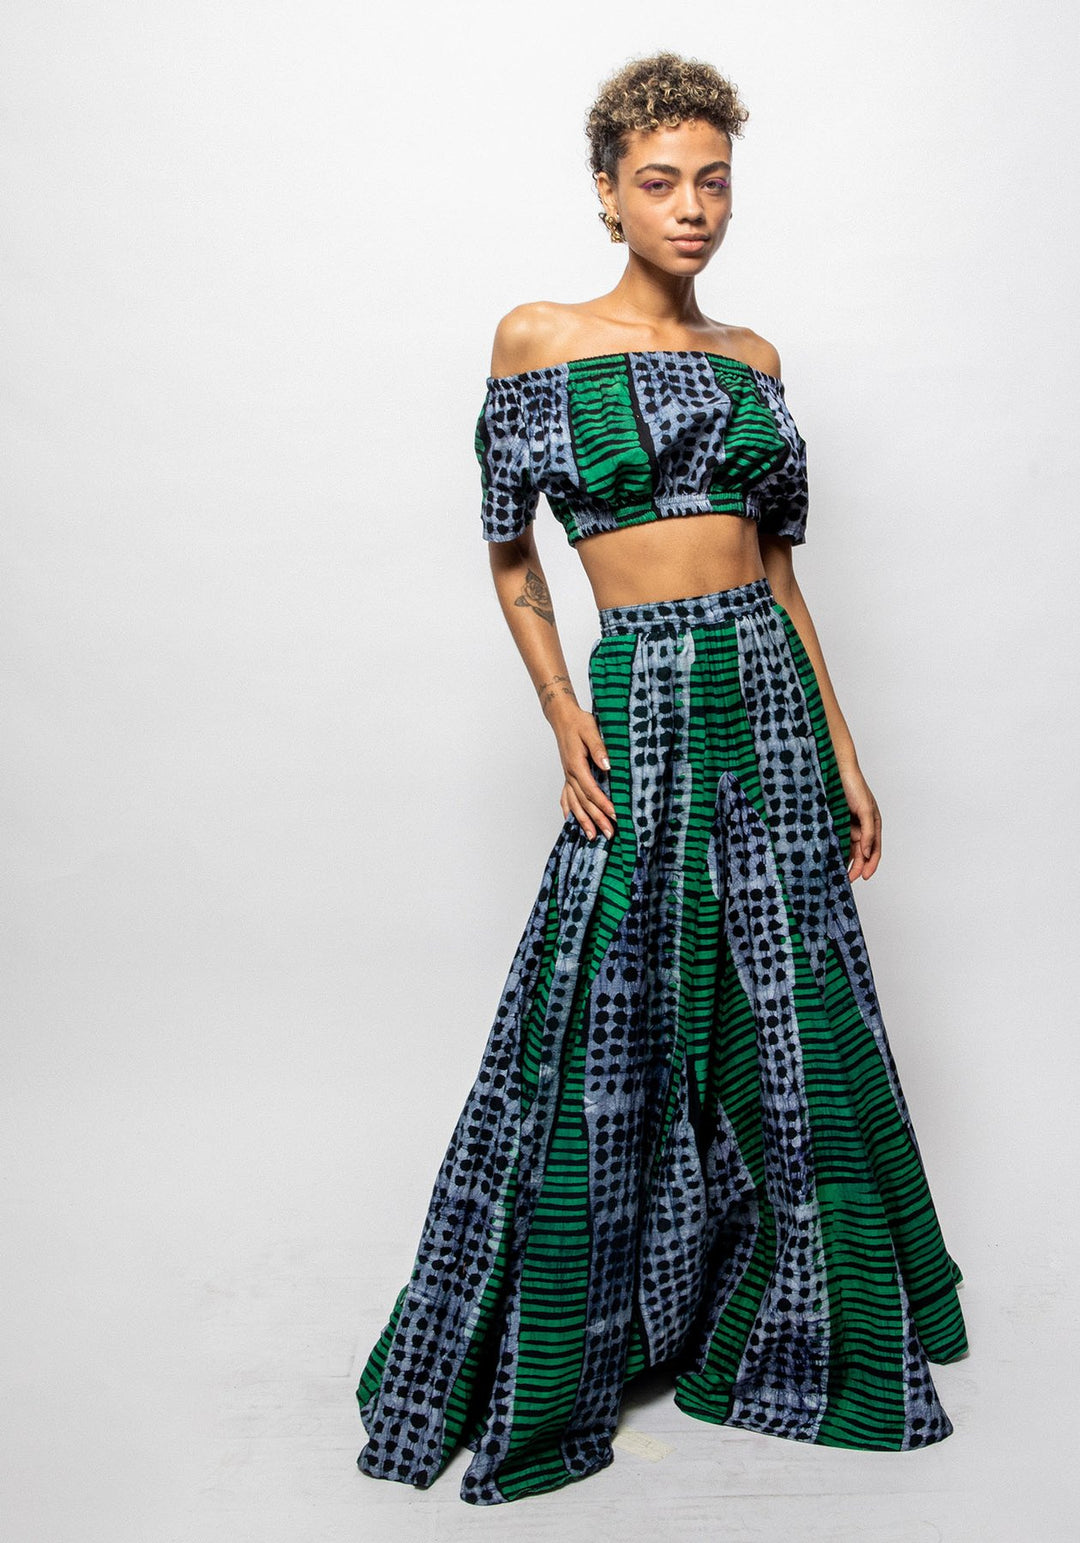 Ghana, Fashion, Africa, diaspora, cotton, dresses, GOWNS, skirts, shirts, tops, womenswear, womens, Handmade, bag, West Africa, Gift, travel, vacation, beach, picnic, pool, swim, sand, family, trip, luxury, resort, spring, summer, concert, gala, event, party, brunch, chic, custom, bespoke, plus-sized, extended sizes, inclusivity, celebration, special, cotton, packable, luxury, accessible, new, novelty, classic​, professor, academia, Africana